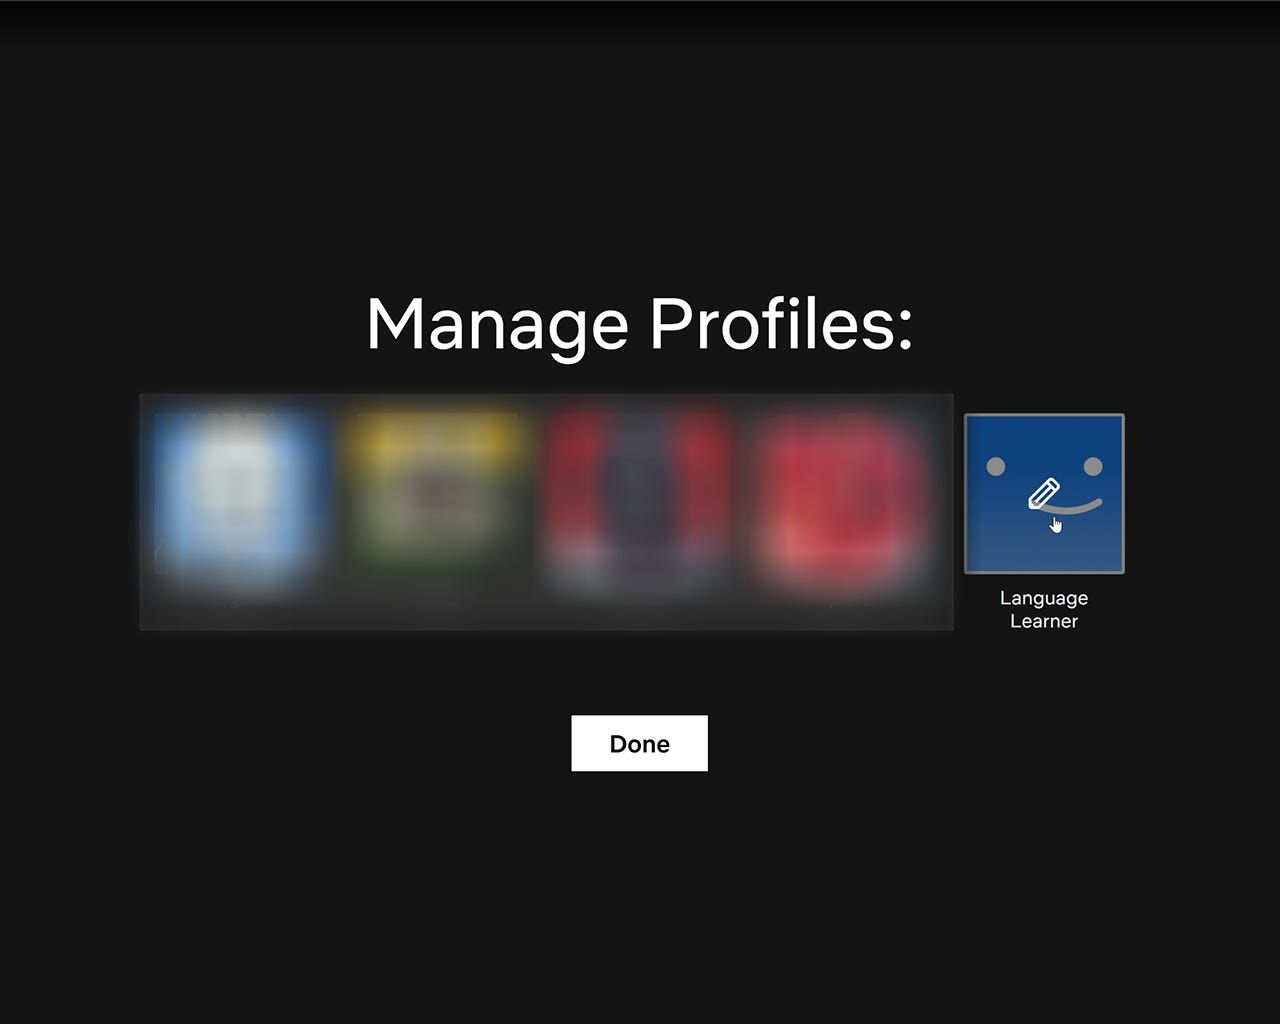 Netflix "Manage Profiles" page showing the mouse cursor hovering over the newly-added profile avatar, and a Done button below the row of profile avatars.